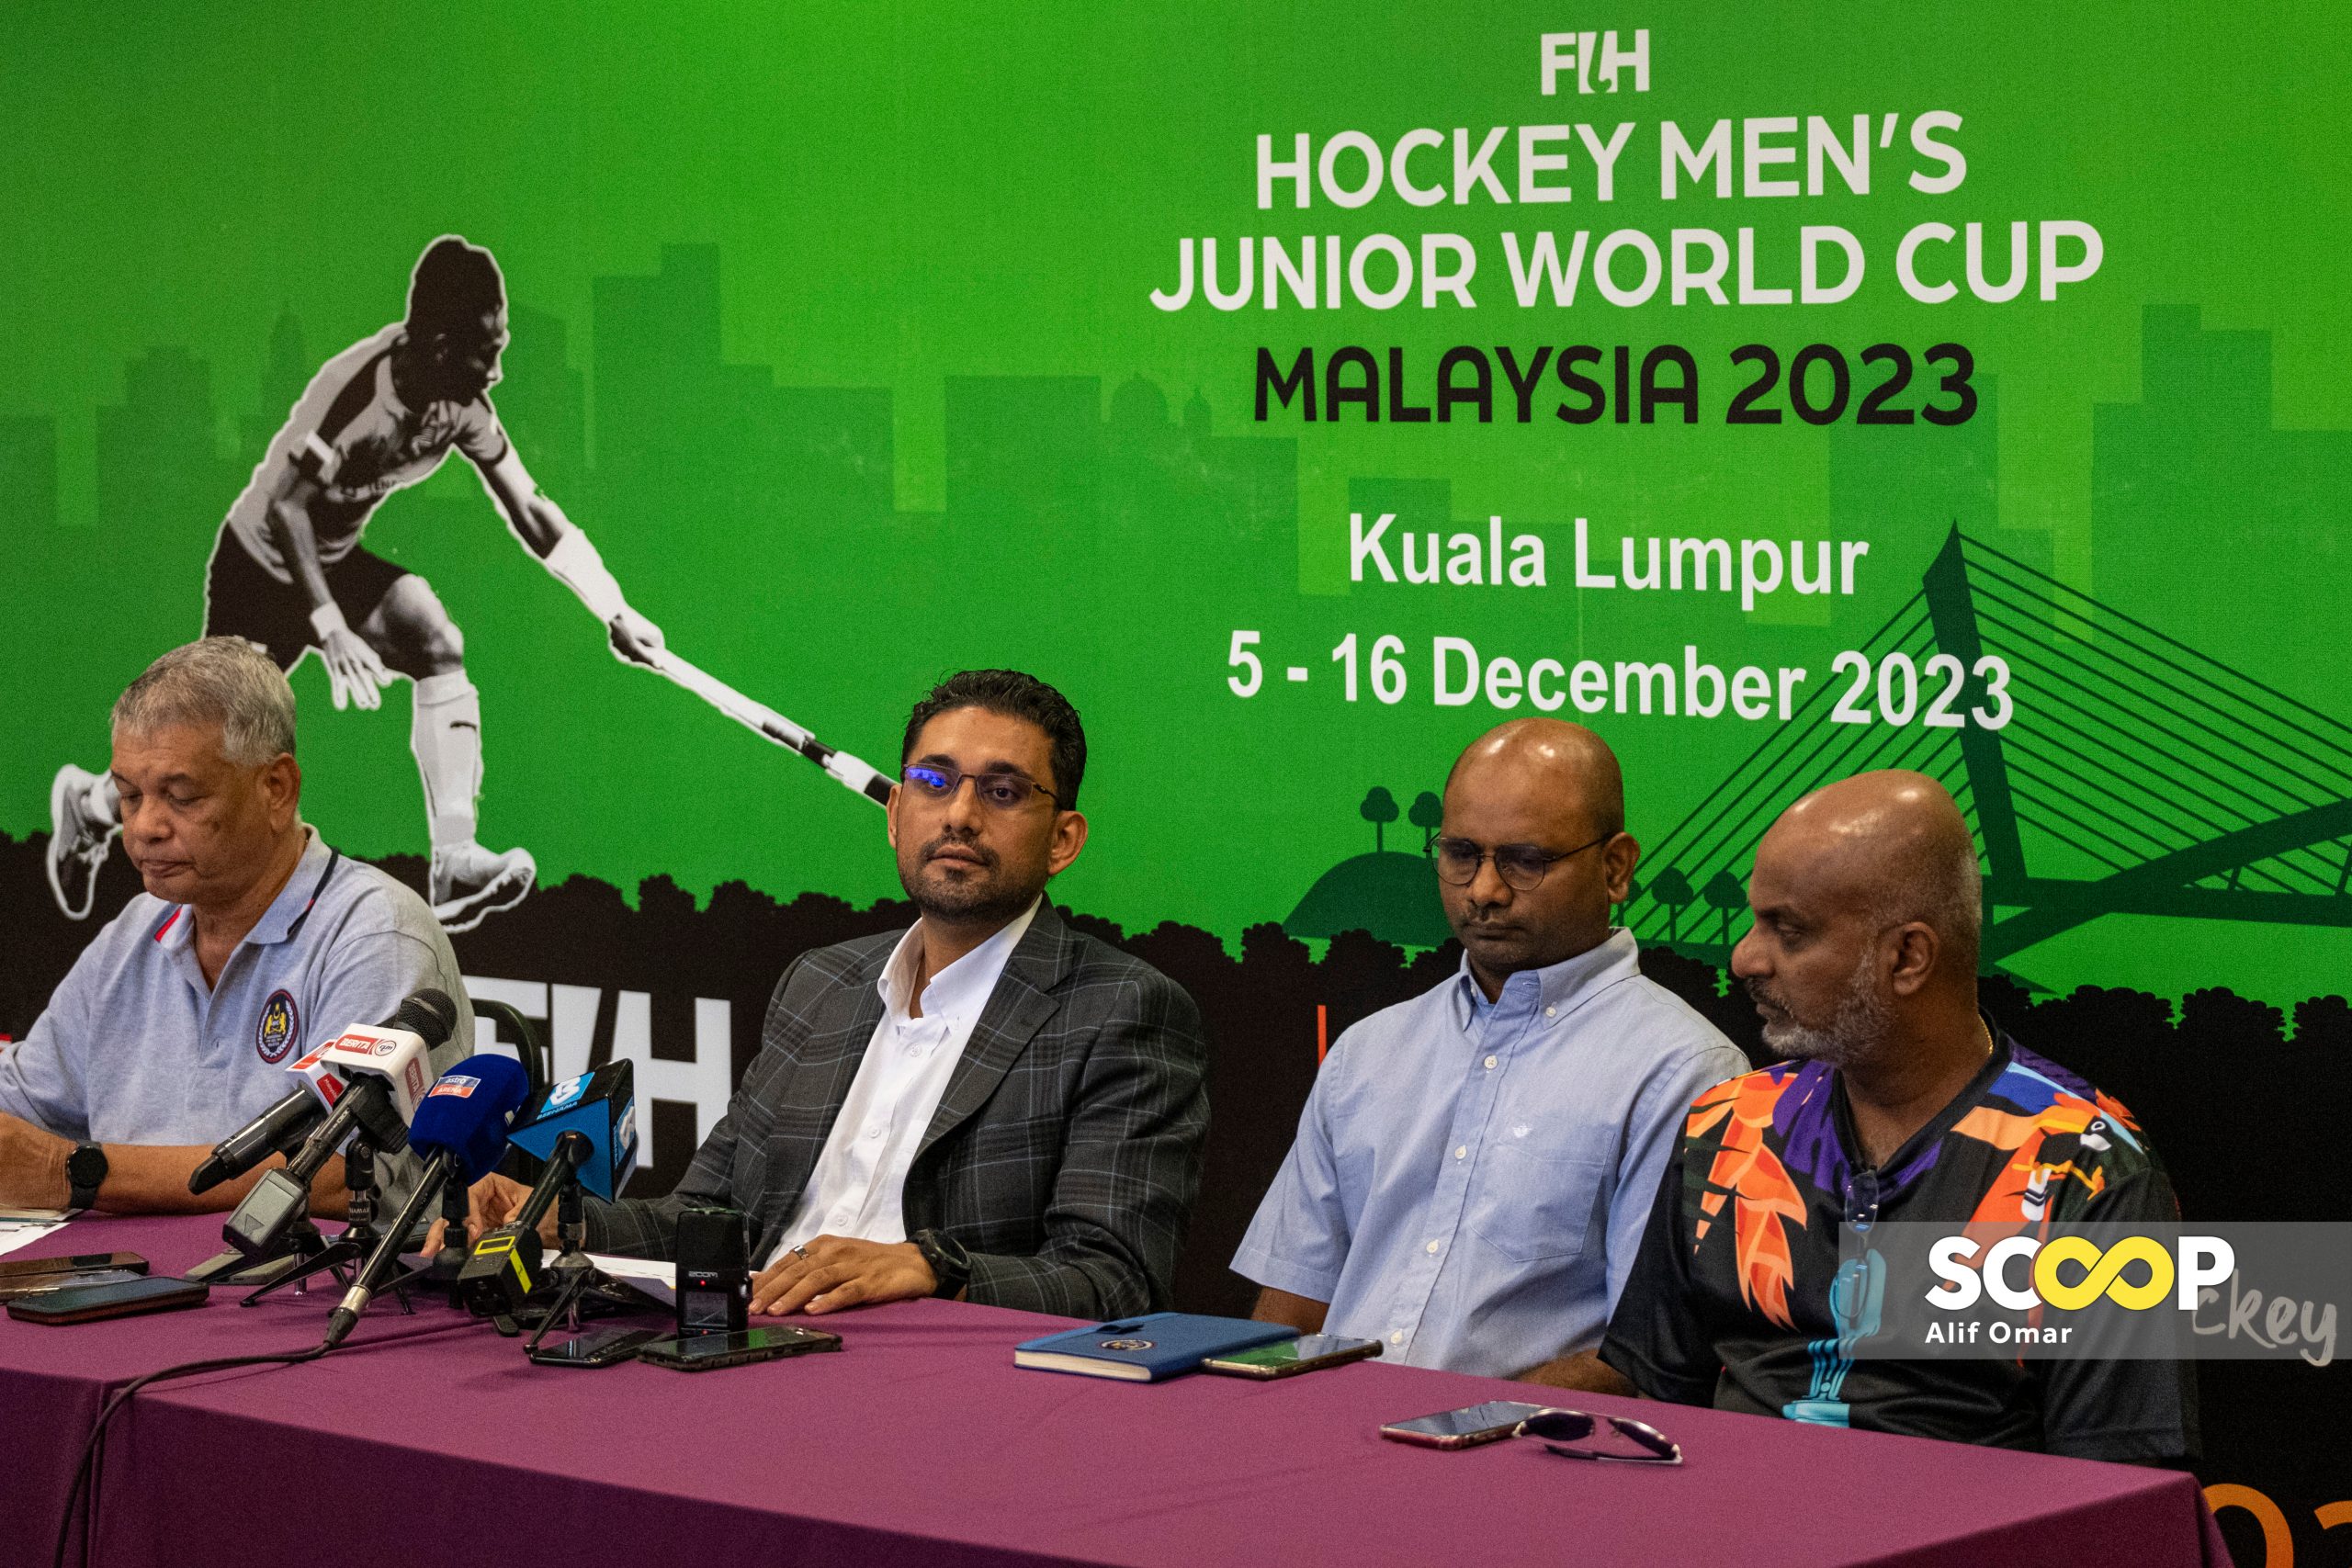 Bold play or risky gamble?: MHC invites fans to watch Junior World Cup for free